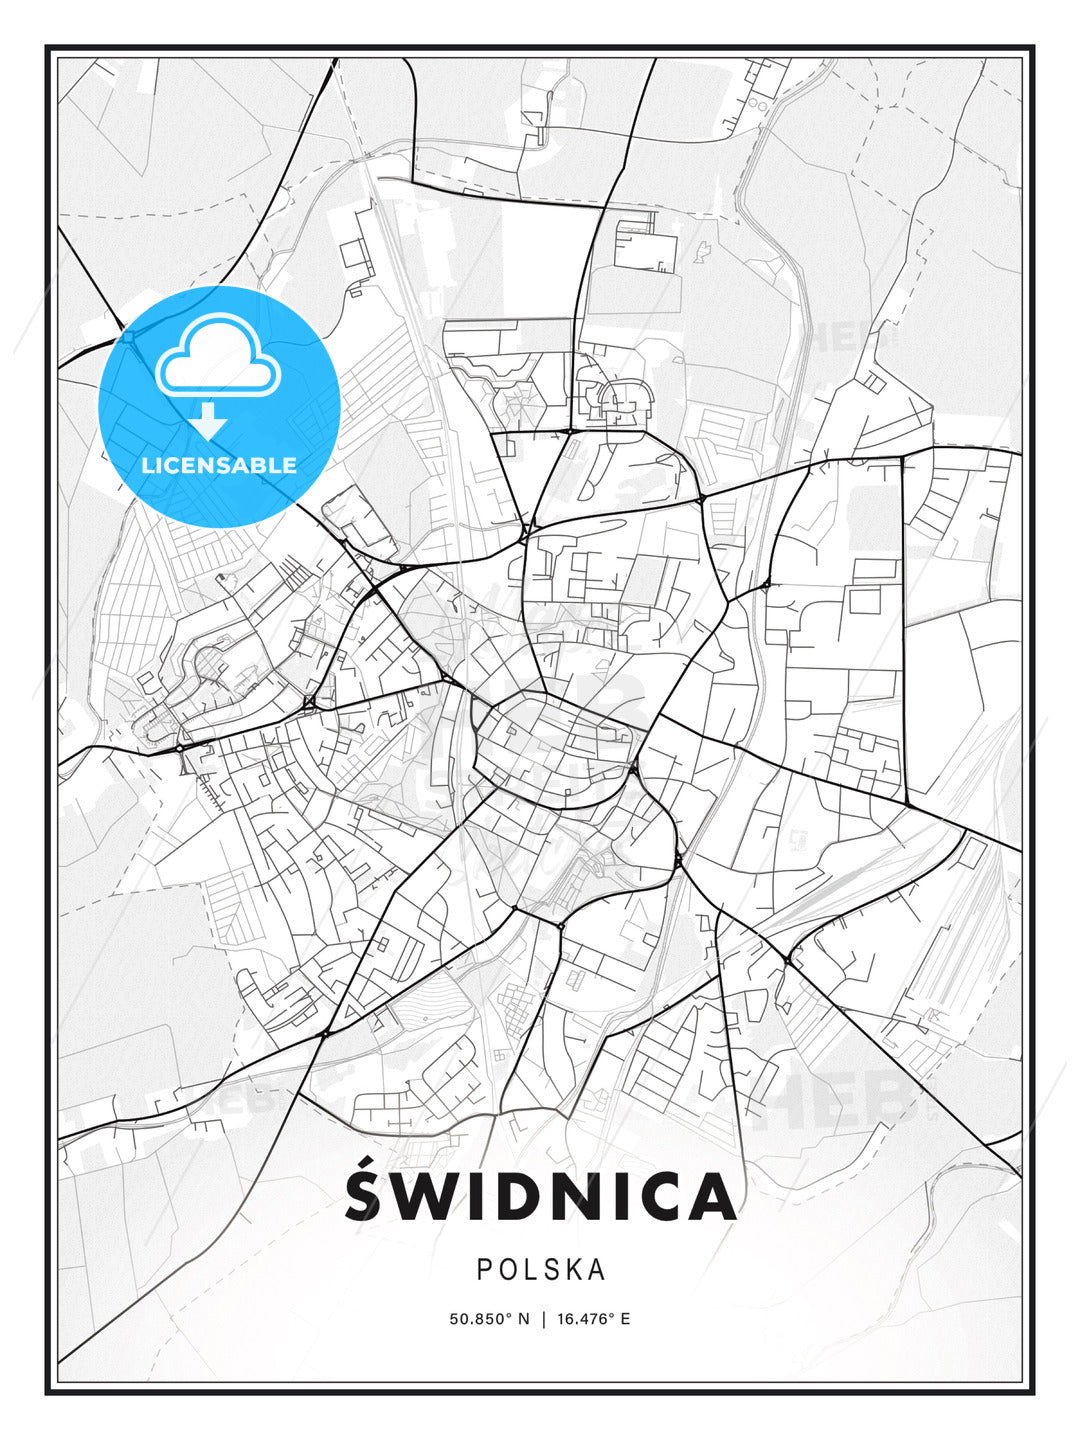 Świdnica, Poland, Modern Print Template in Various Formats - HEBSTREITS Sketches